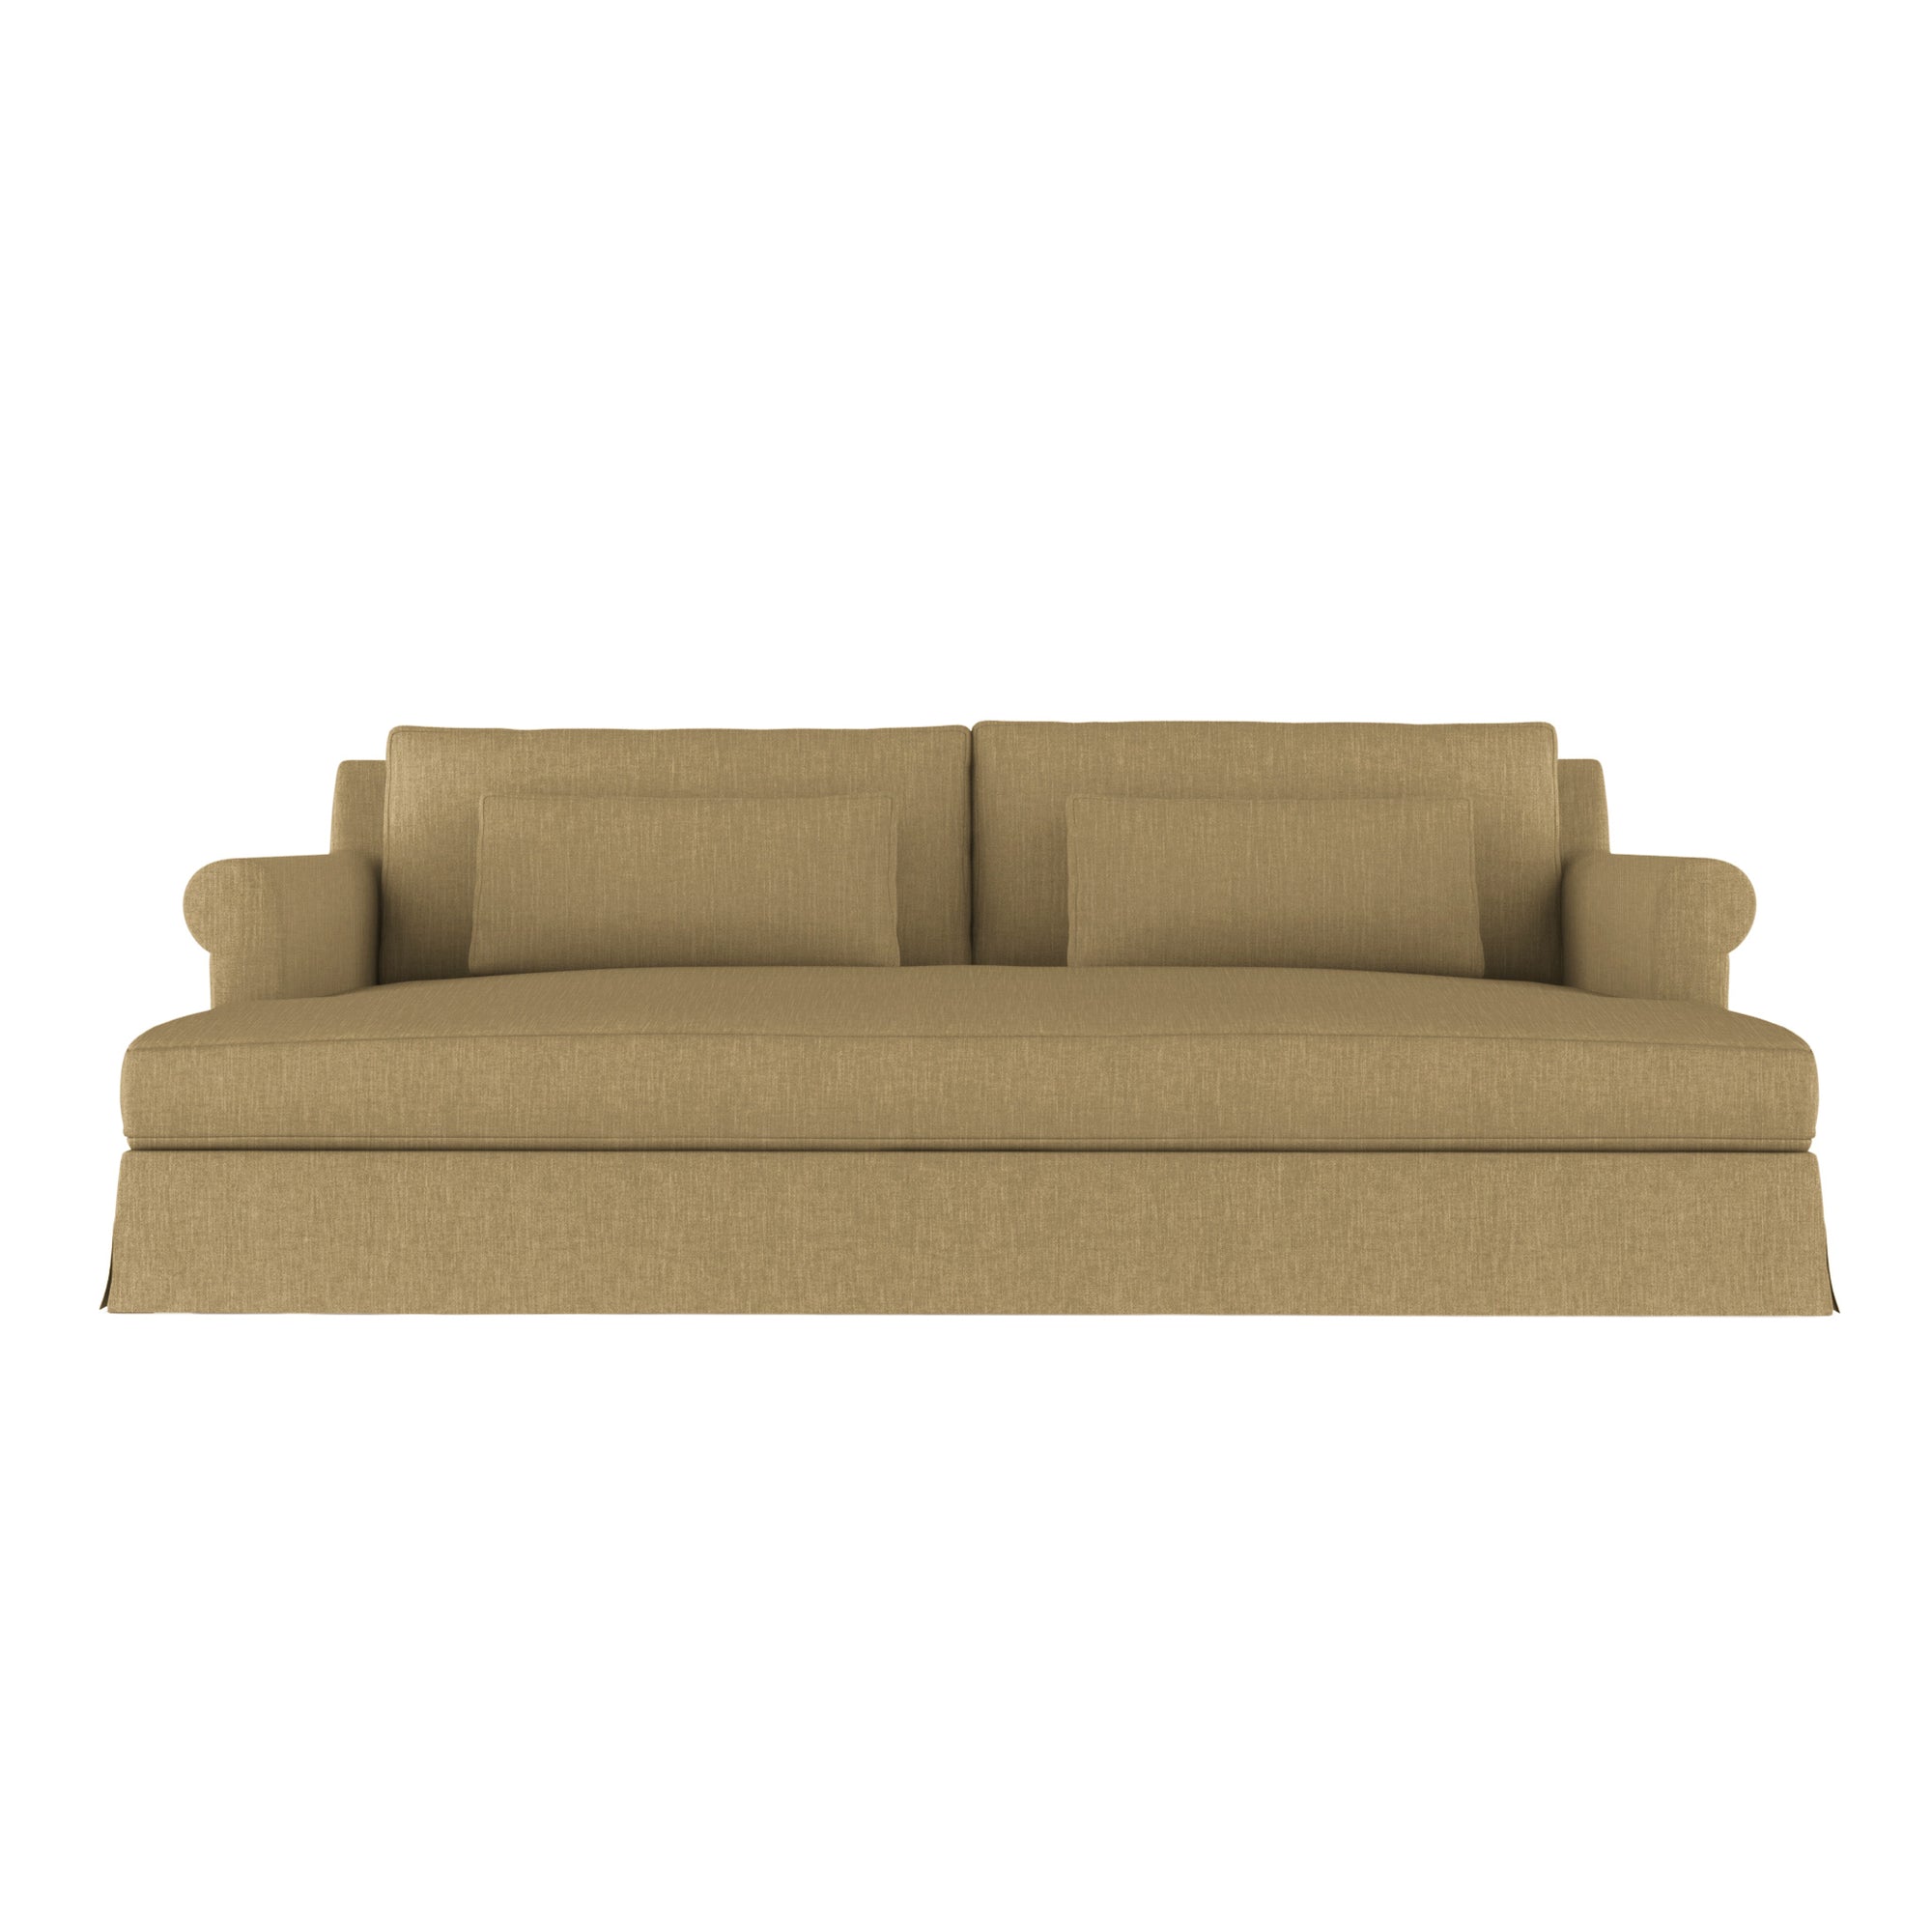 Ludlow Daybed - Marzipan Box Weave Linen